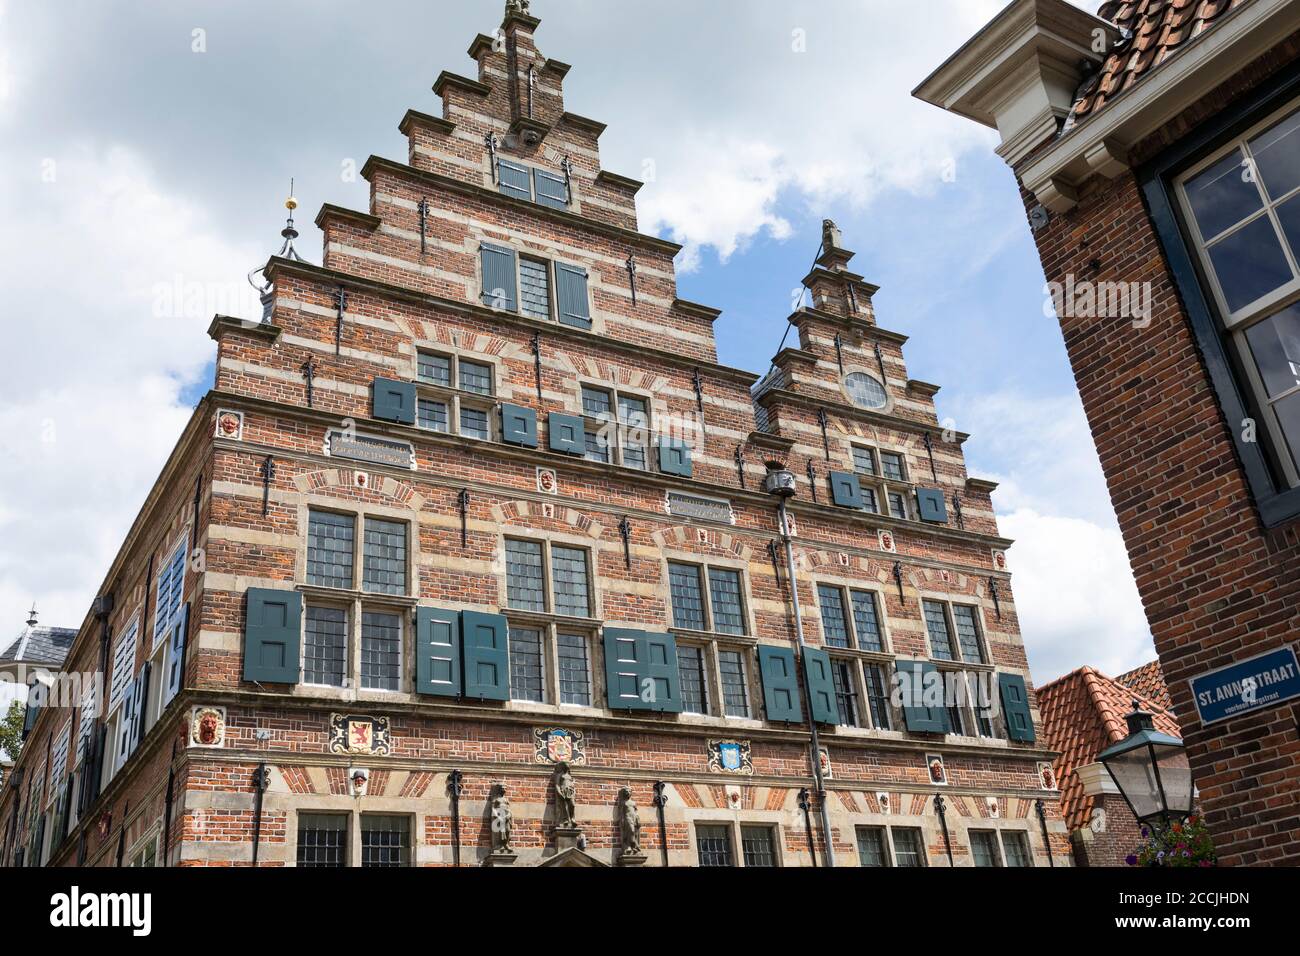 Old town hall of the city Naarden Vesting with blinds and a step gabled front, Netherlands Stock Photo